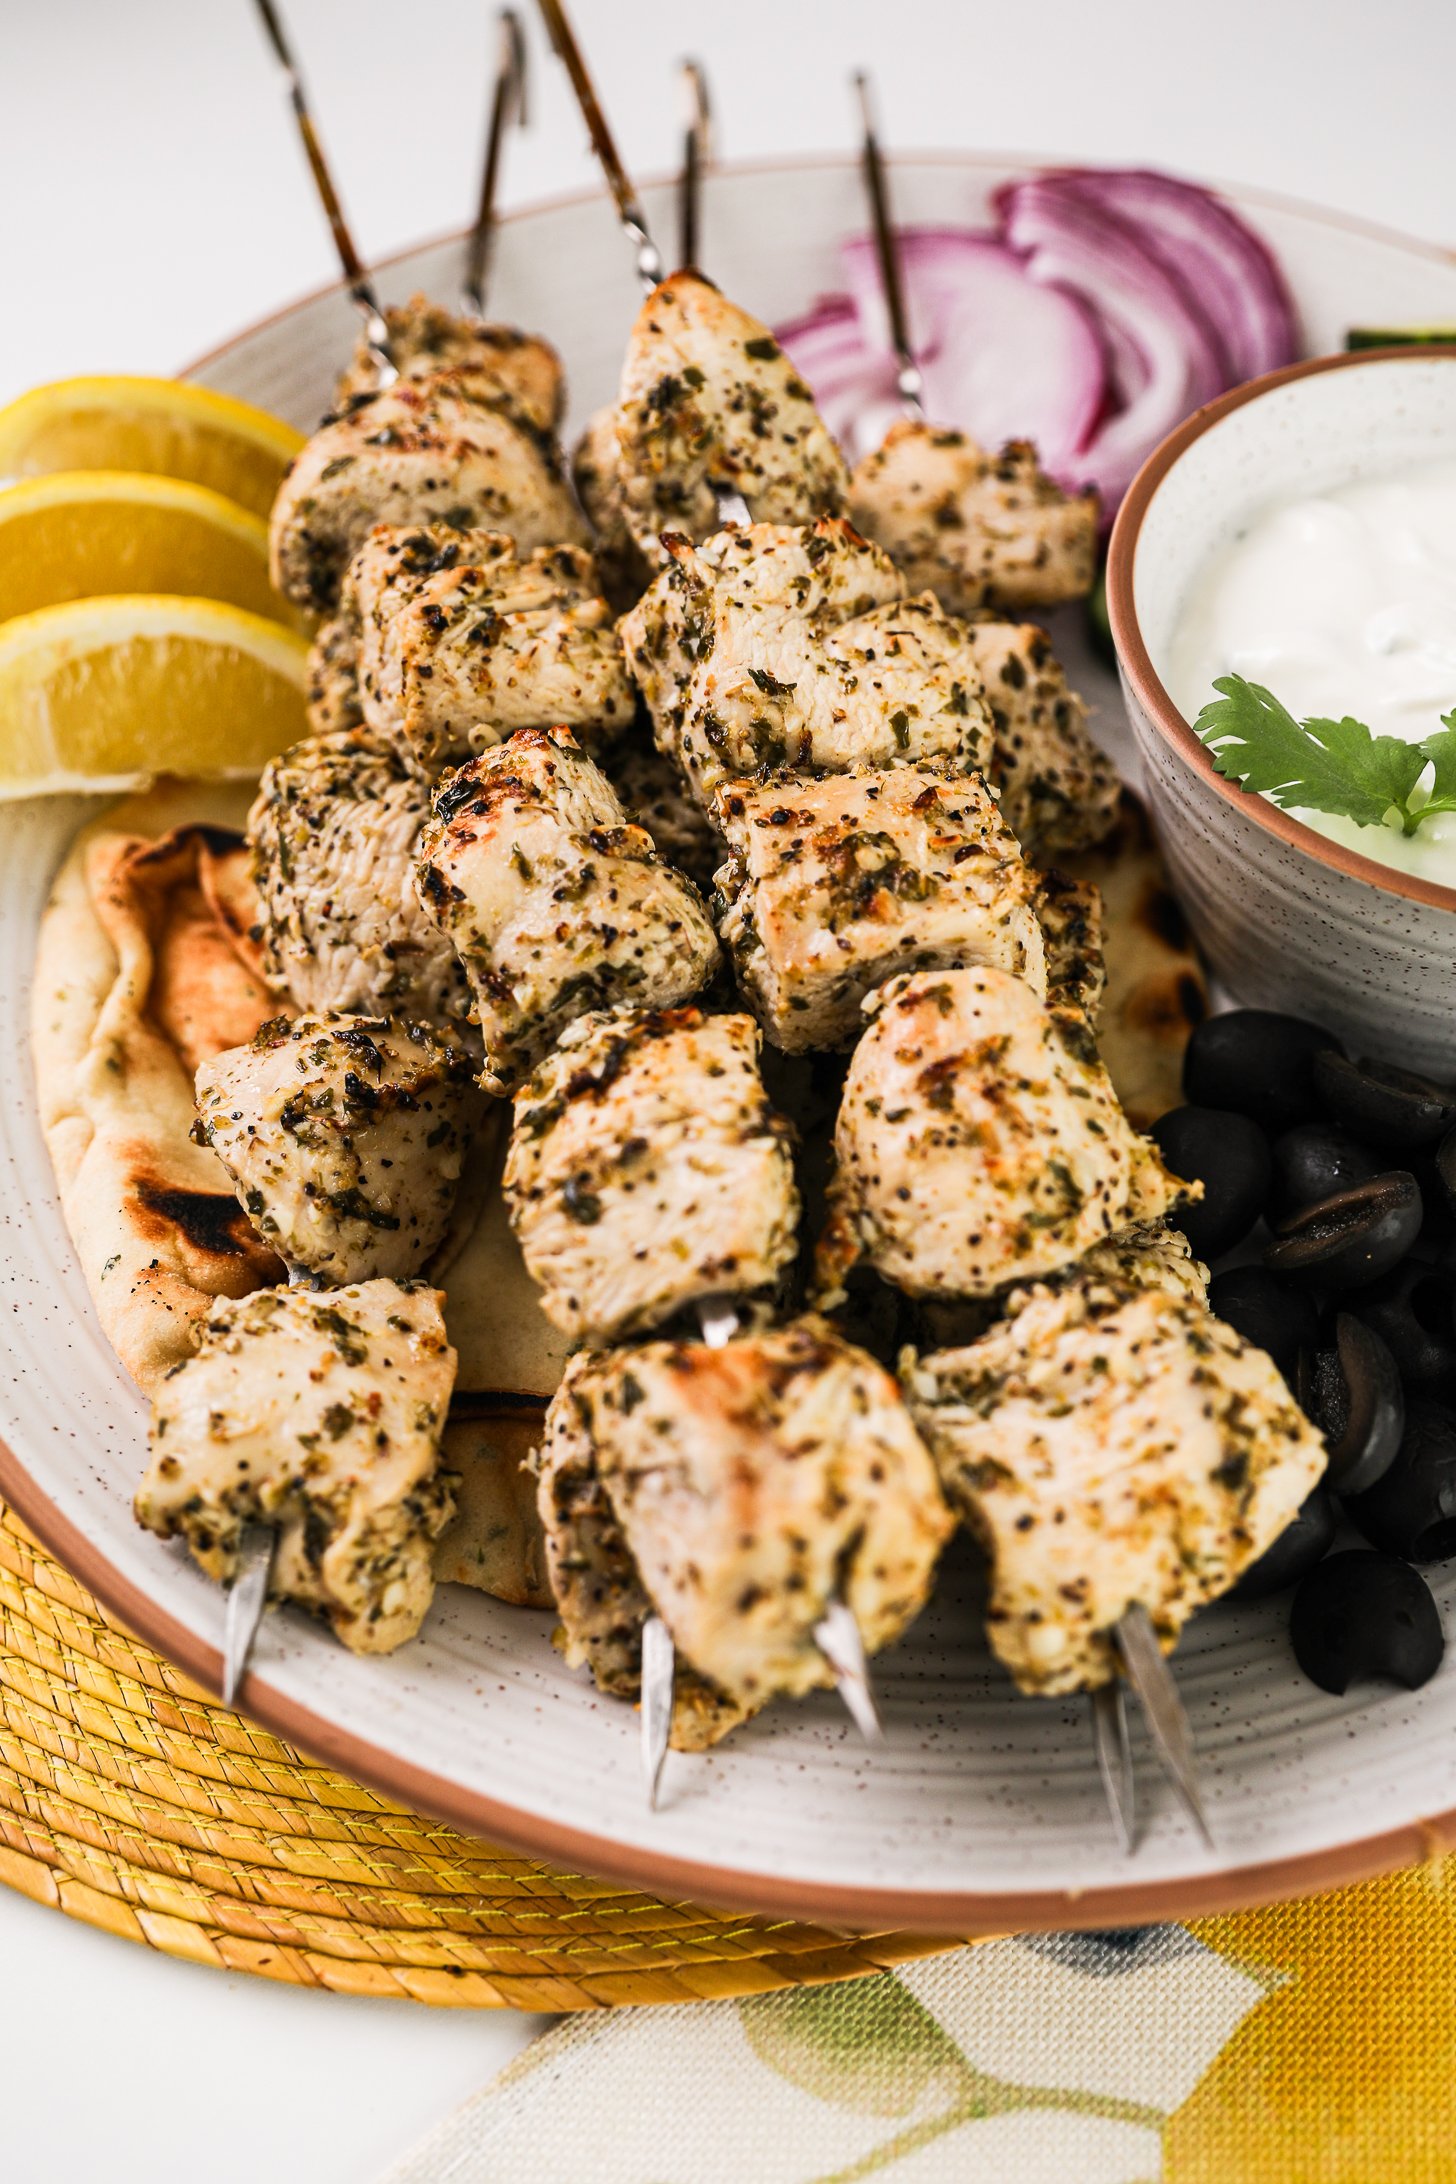 Perspective image of skewers of souvlaki chicken atop a pita with veggies and tzatziki.